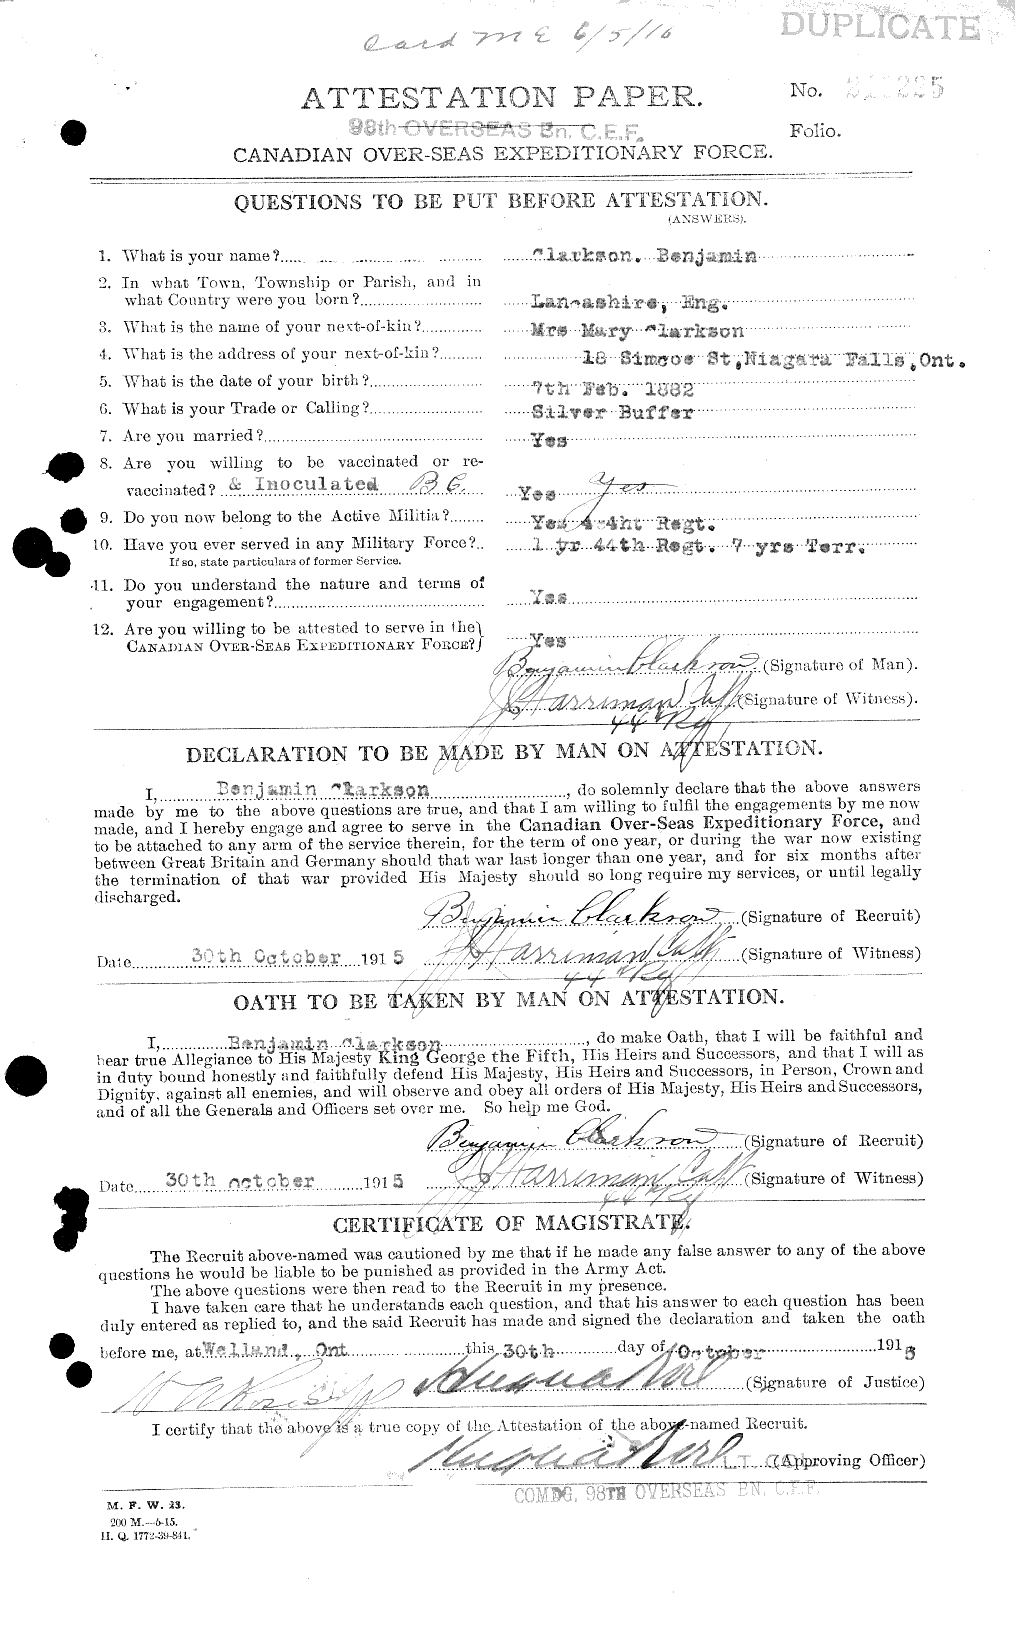 Personnel Records of the First World War - CEF 023620a